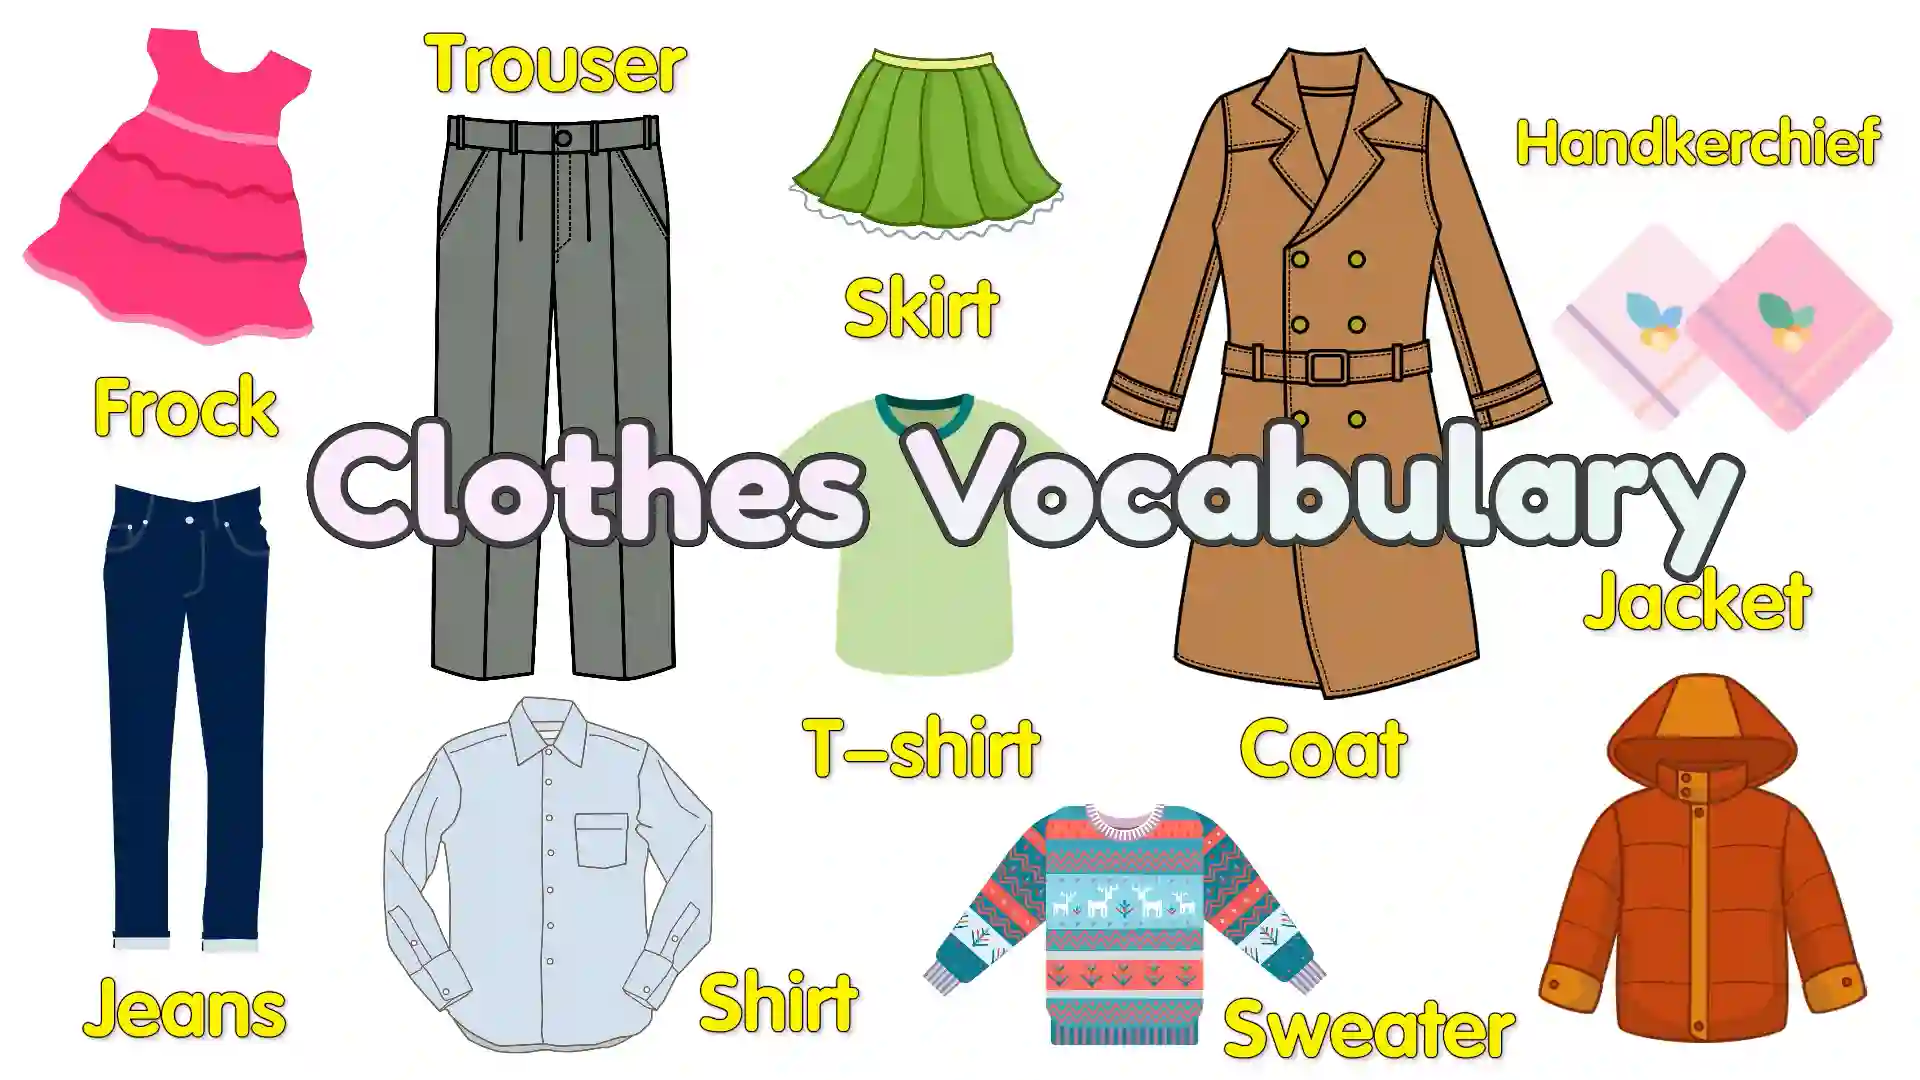 Clothes vocabulary in English with images